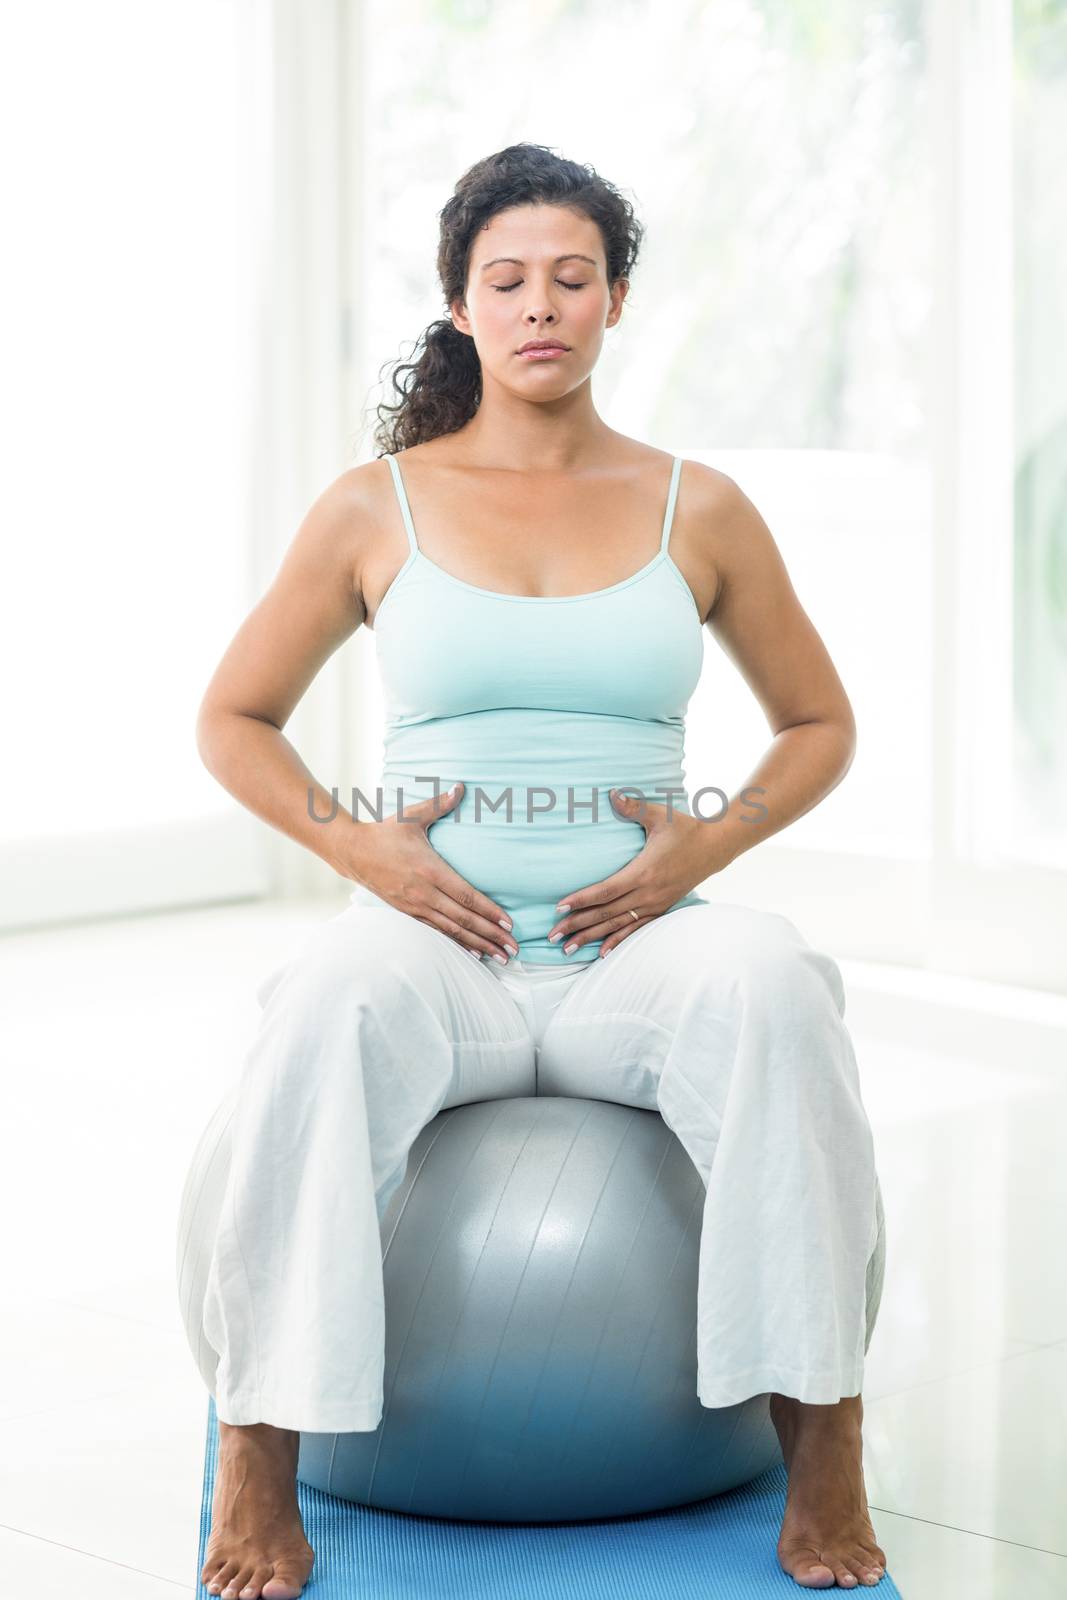 Full length of pregnant woman with eyes closed touching her belly while sitting on exercise ball in fitness studio